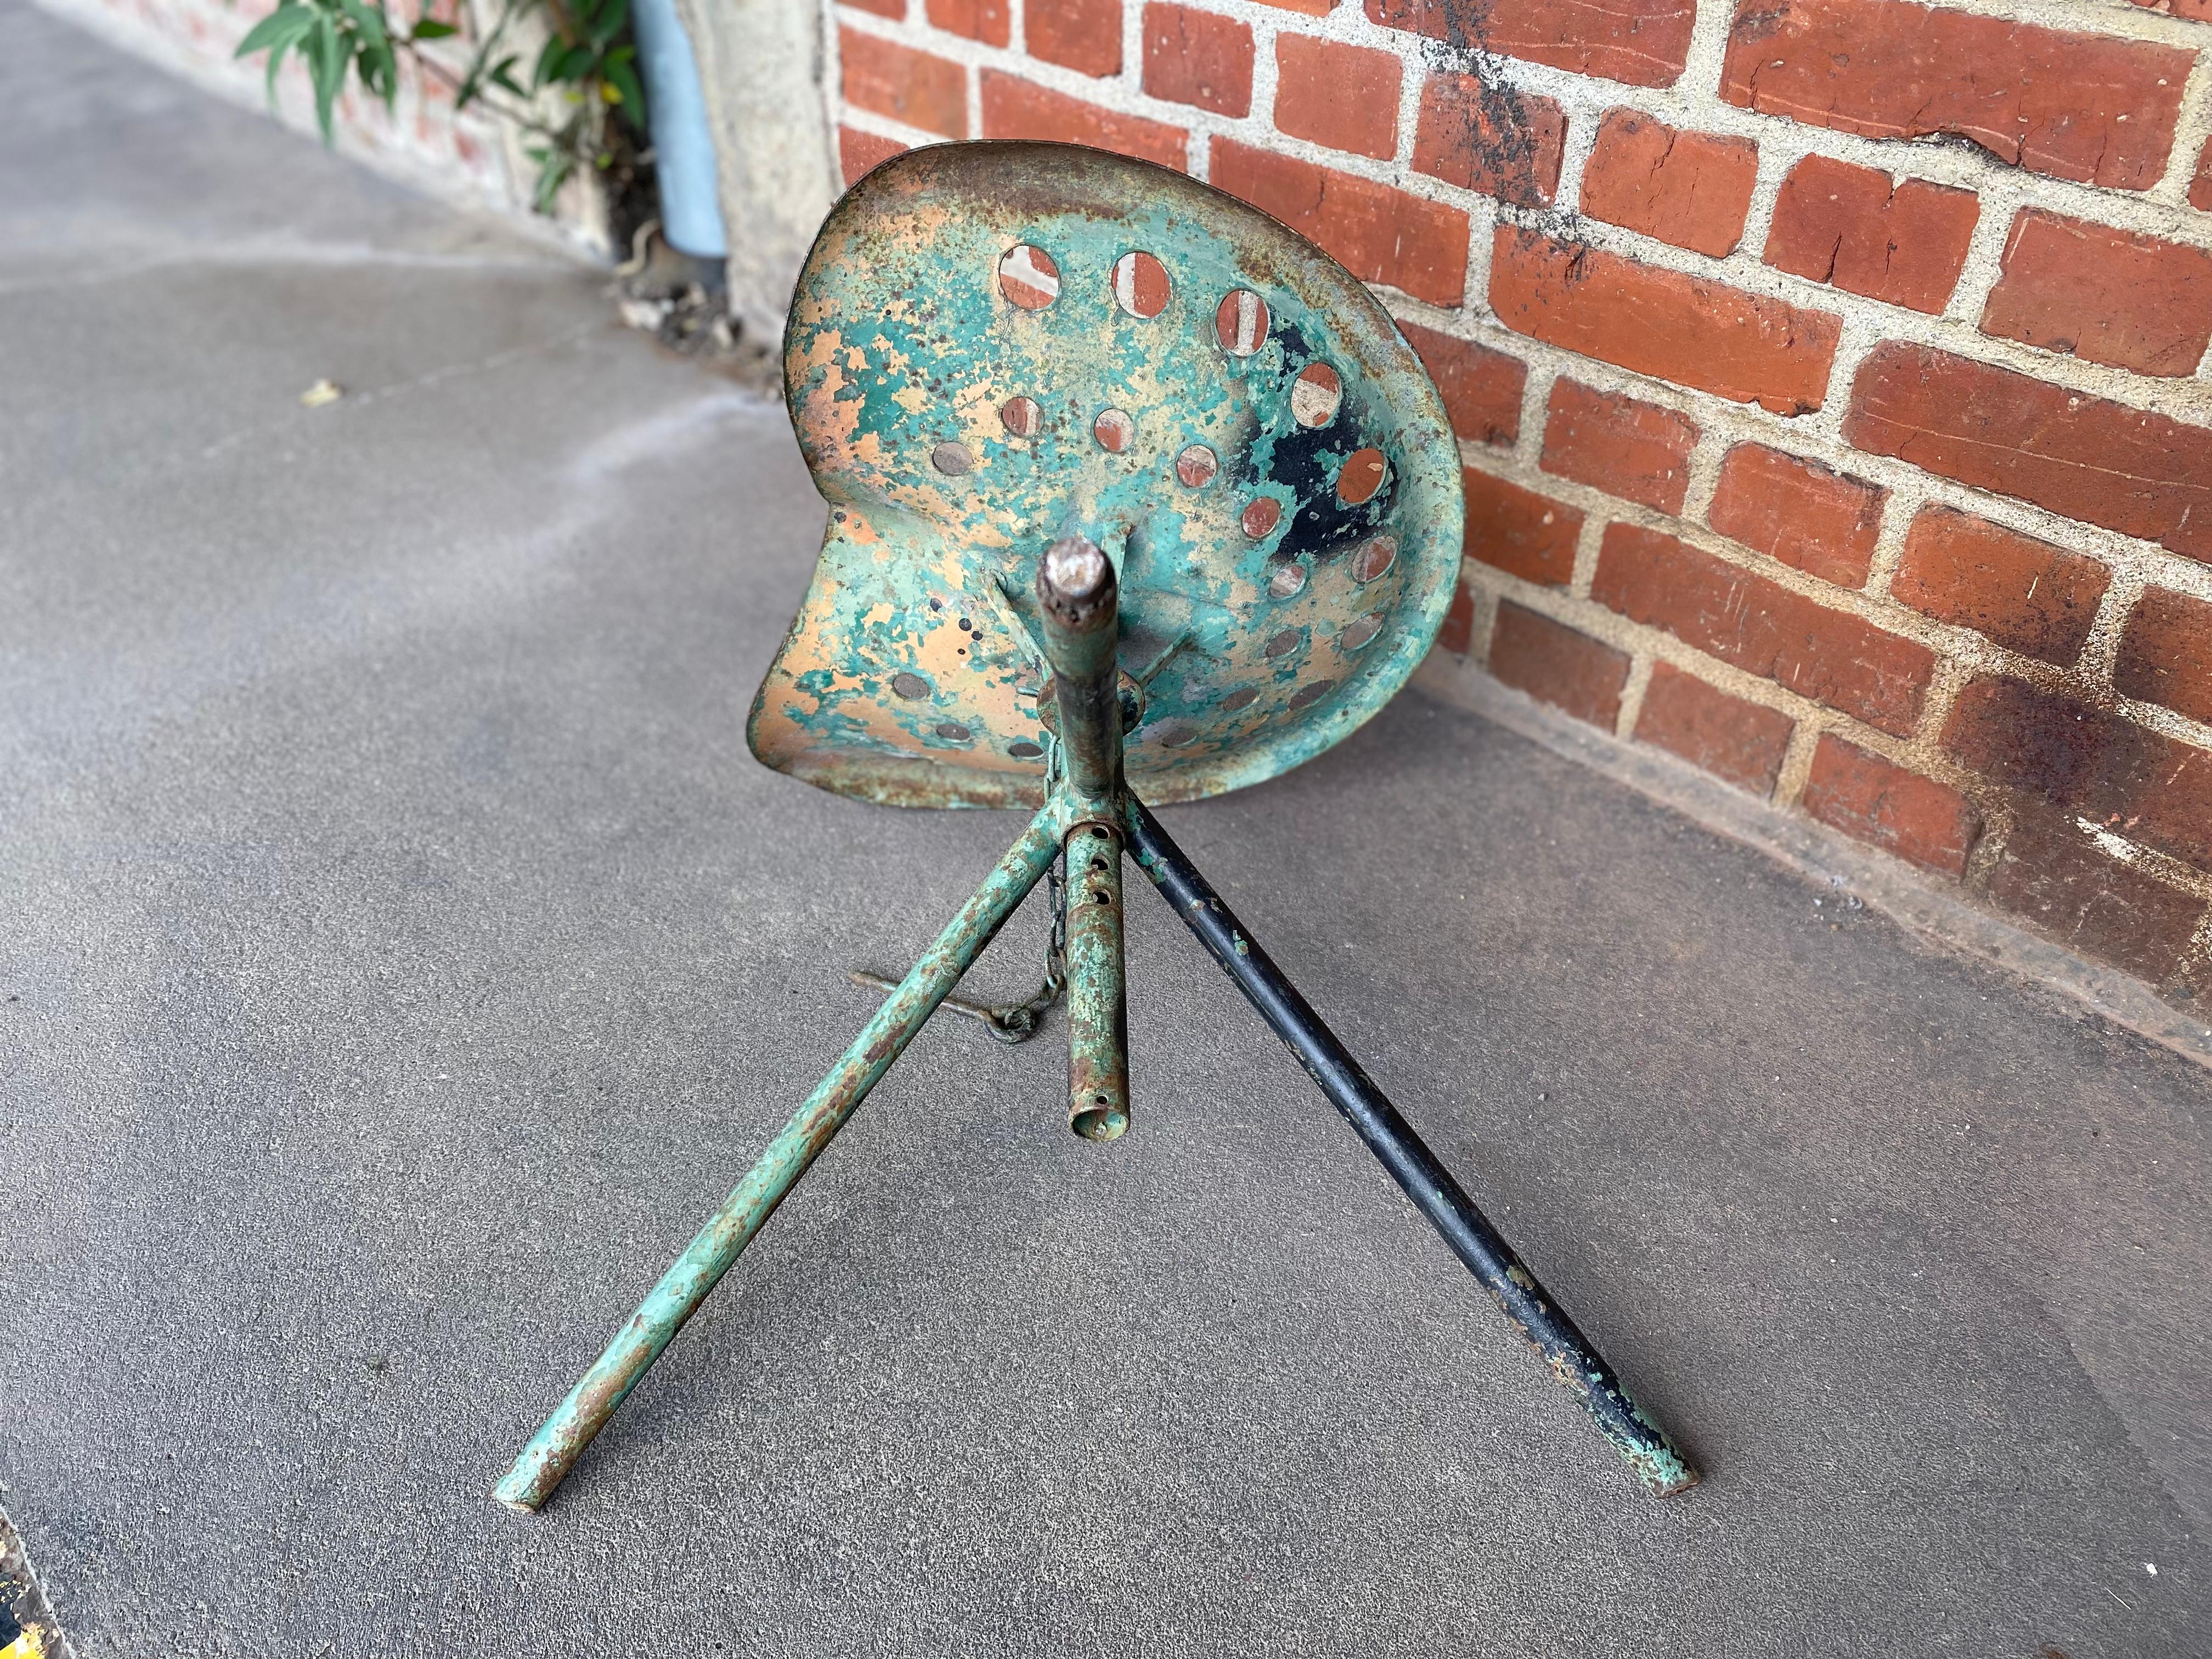 Pair of Vintage Industrial Tractor Seat Stools, Adjustable Height, Green 3